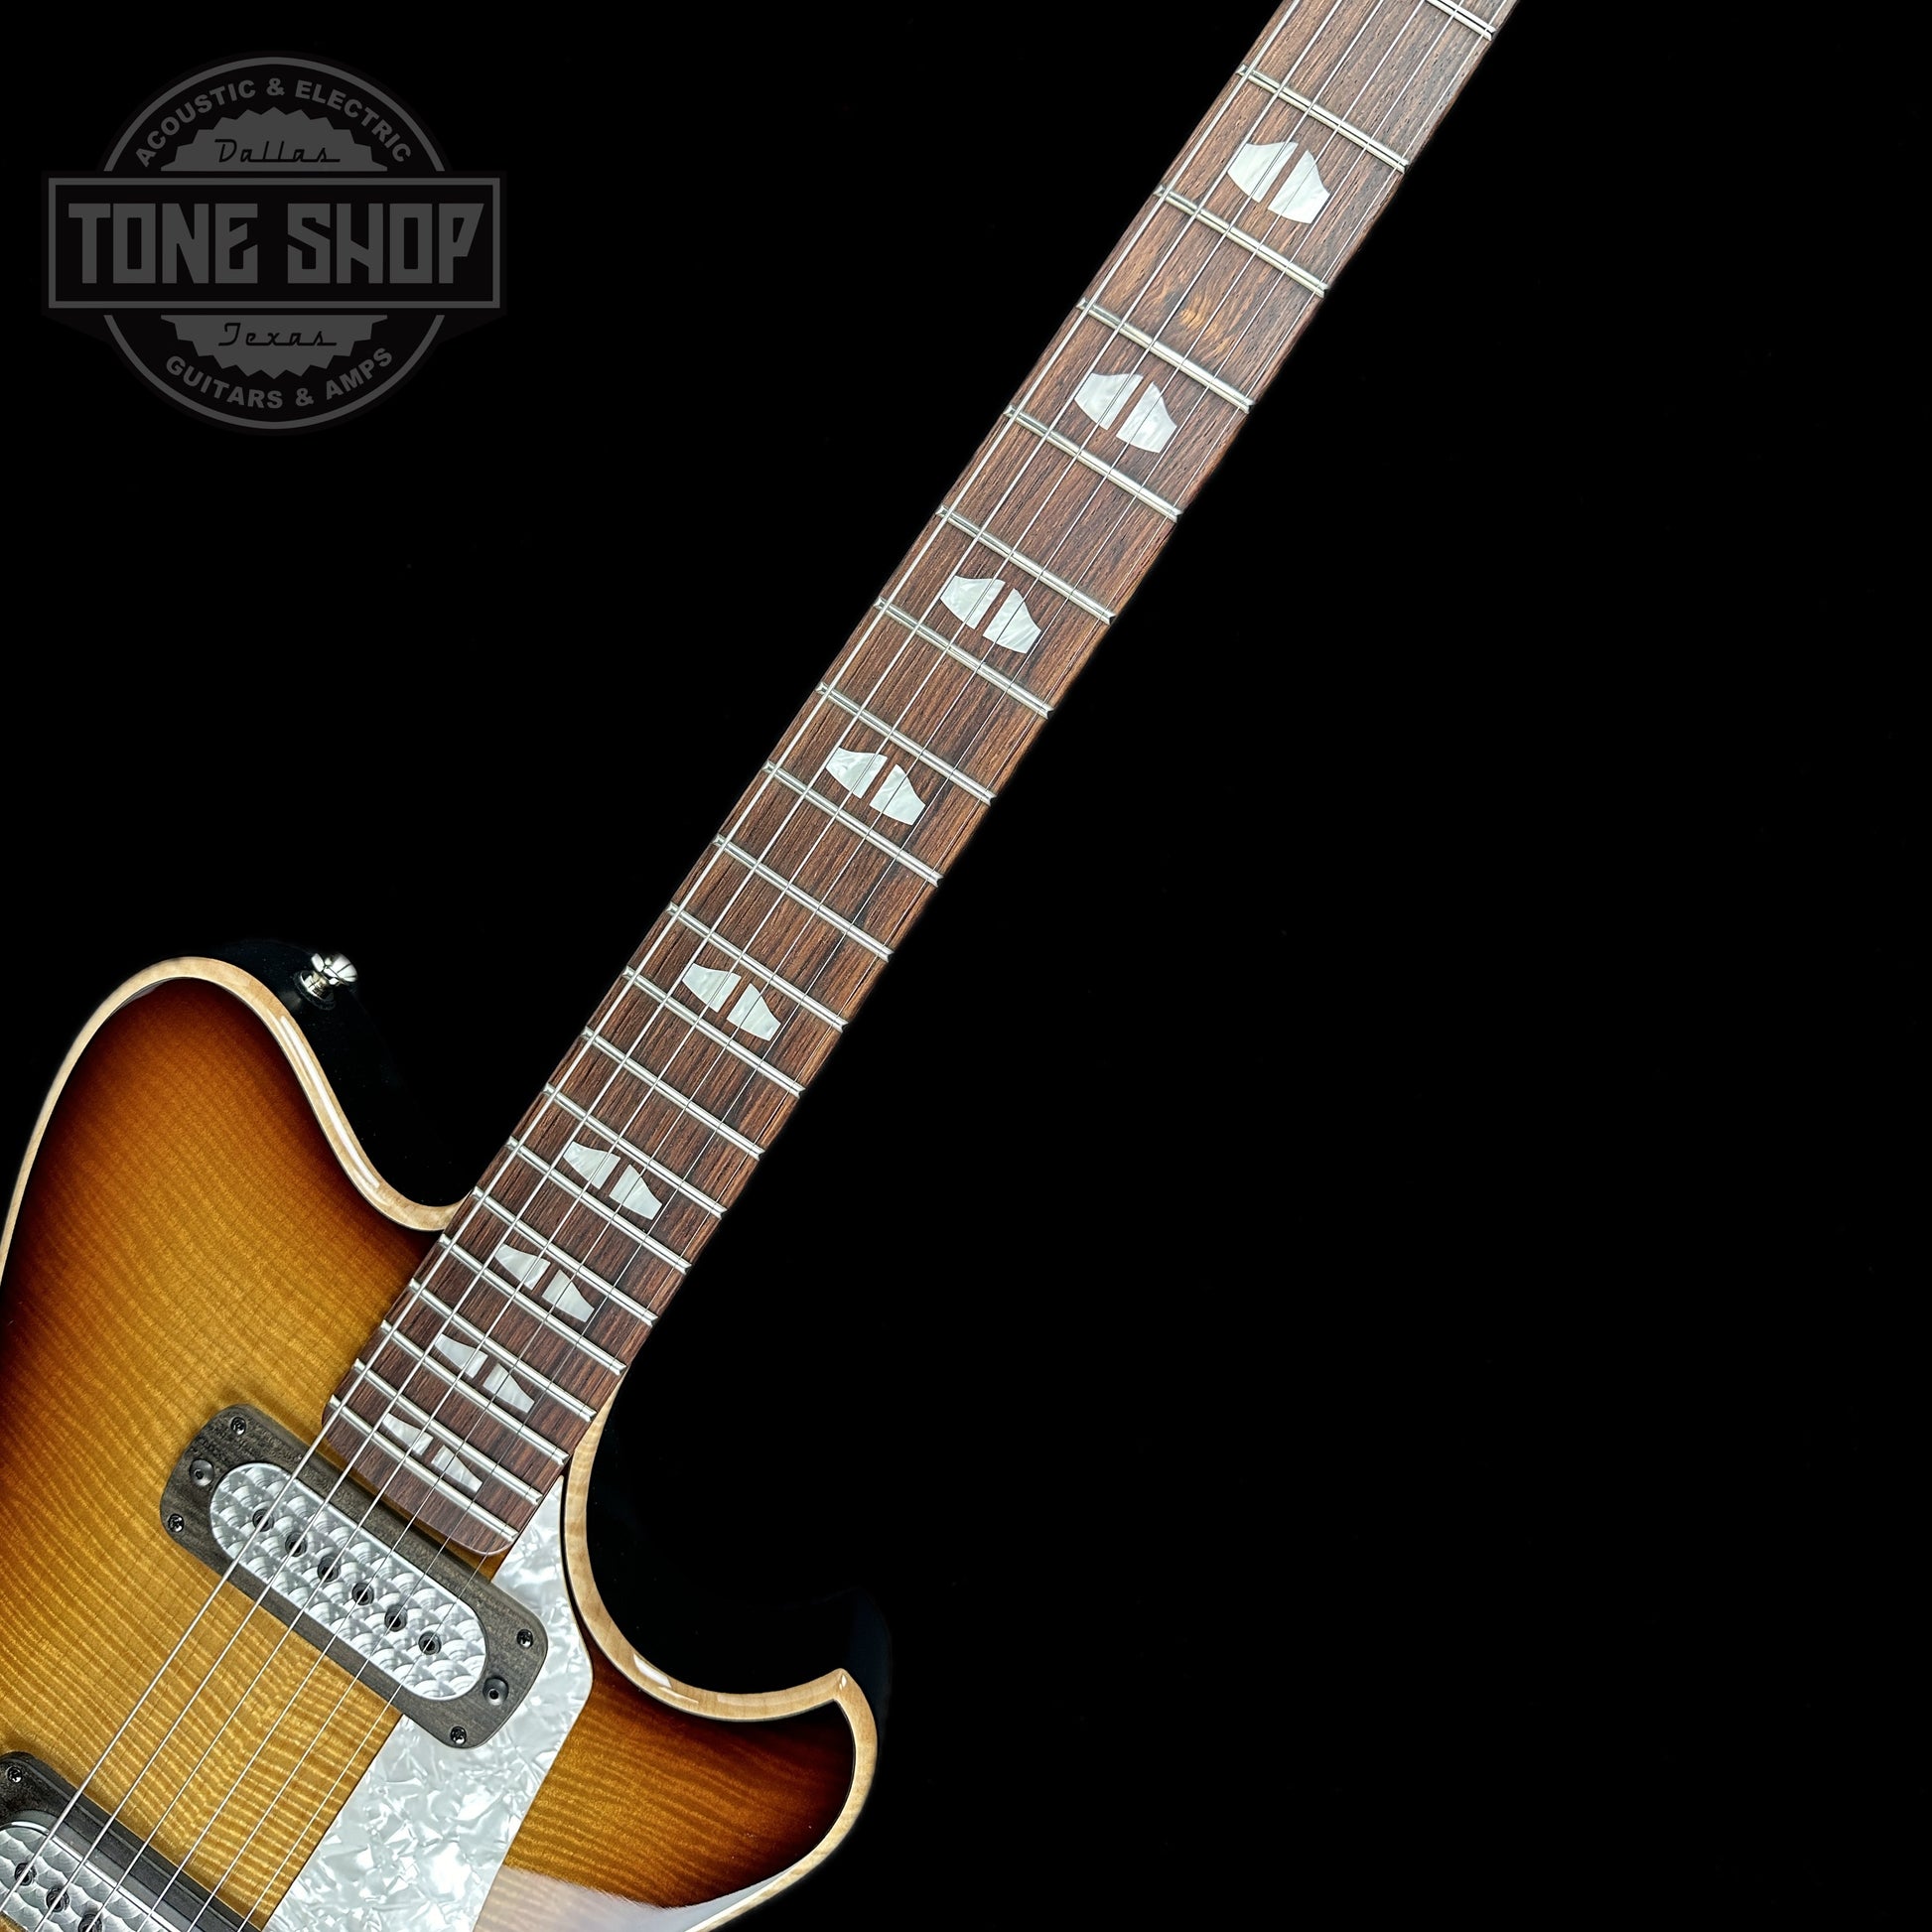 Fretboard of Powers Electric A-Type Select Maple Solana Sunset FF42 Pearl Delrin Warm.